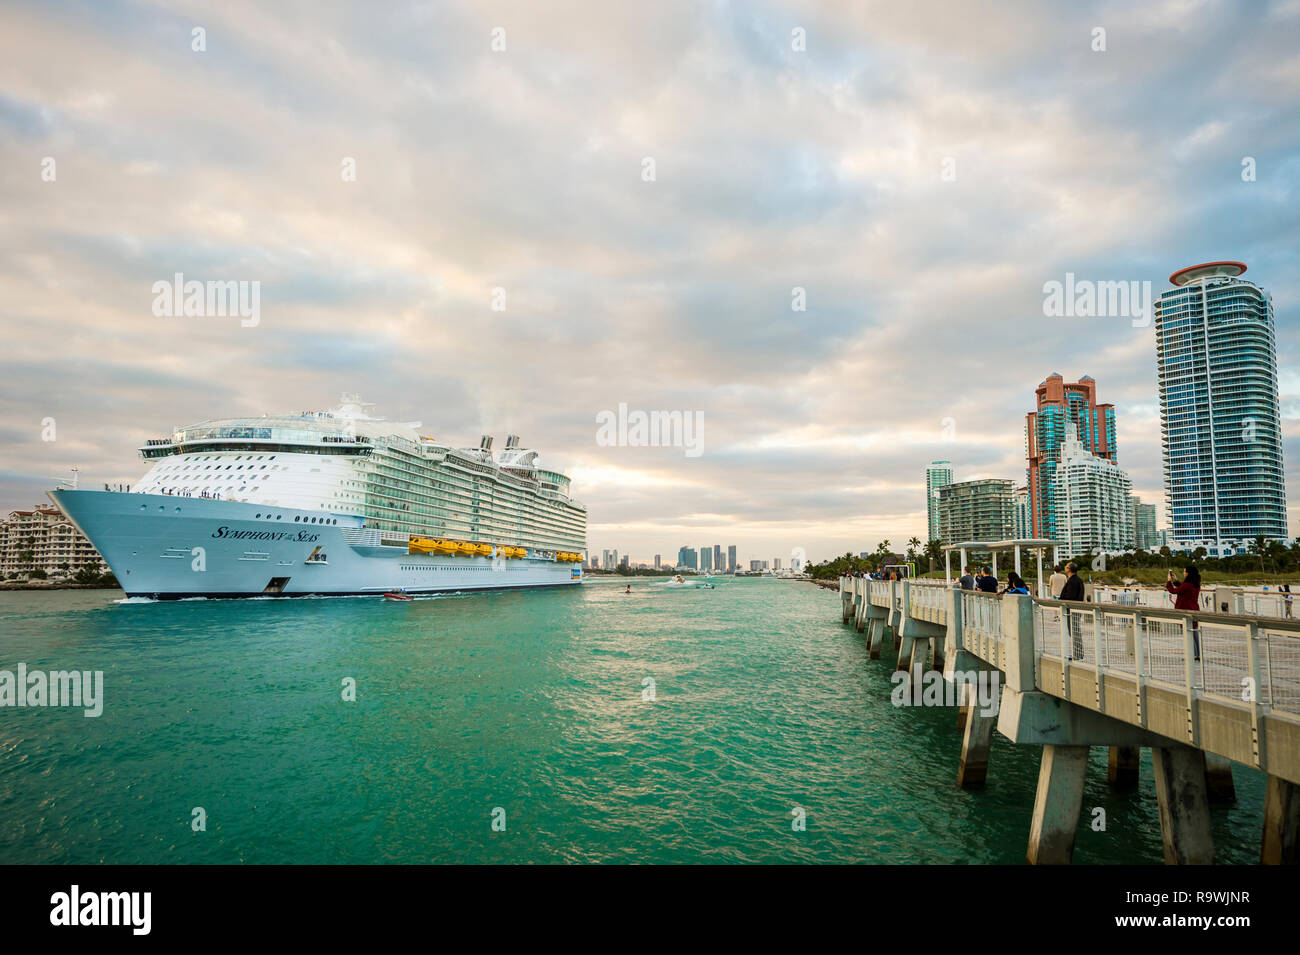 MIAMI - DECEMBER, 2018: The Symphony of the Seas, the largest cruise ship in the world with a capacity of over 6,600 passengers, departs PortMiami. Stock Photo